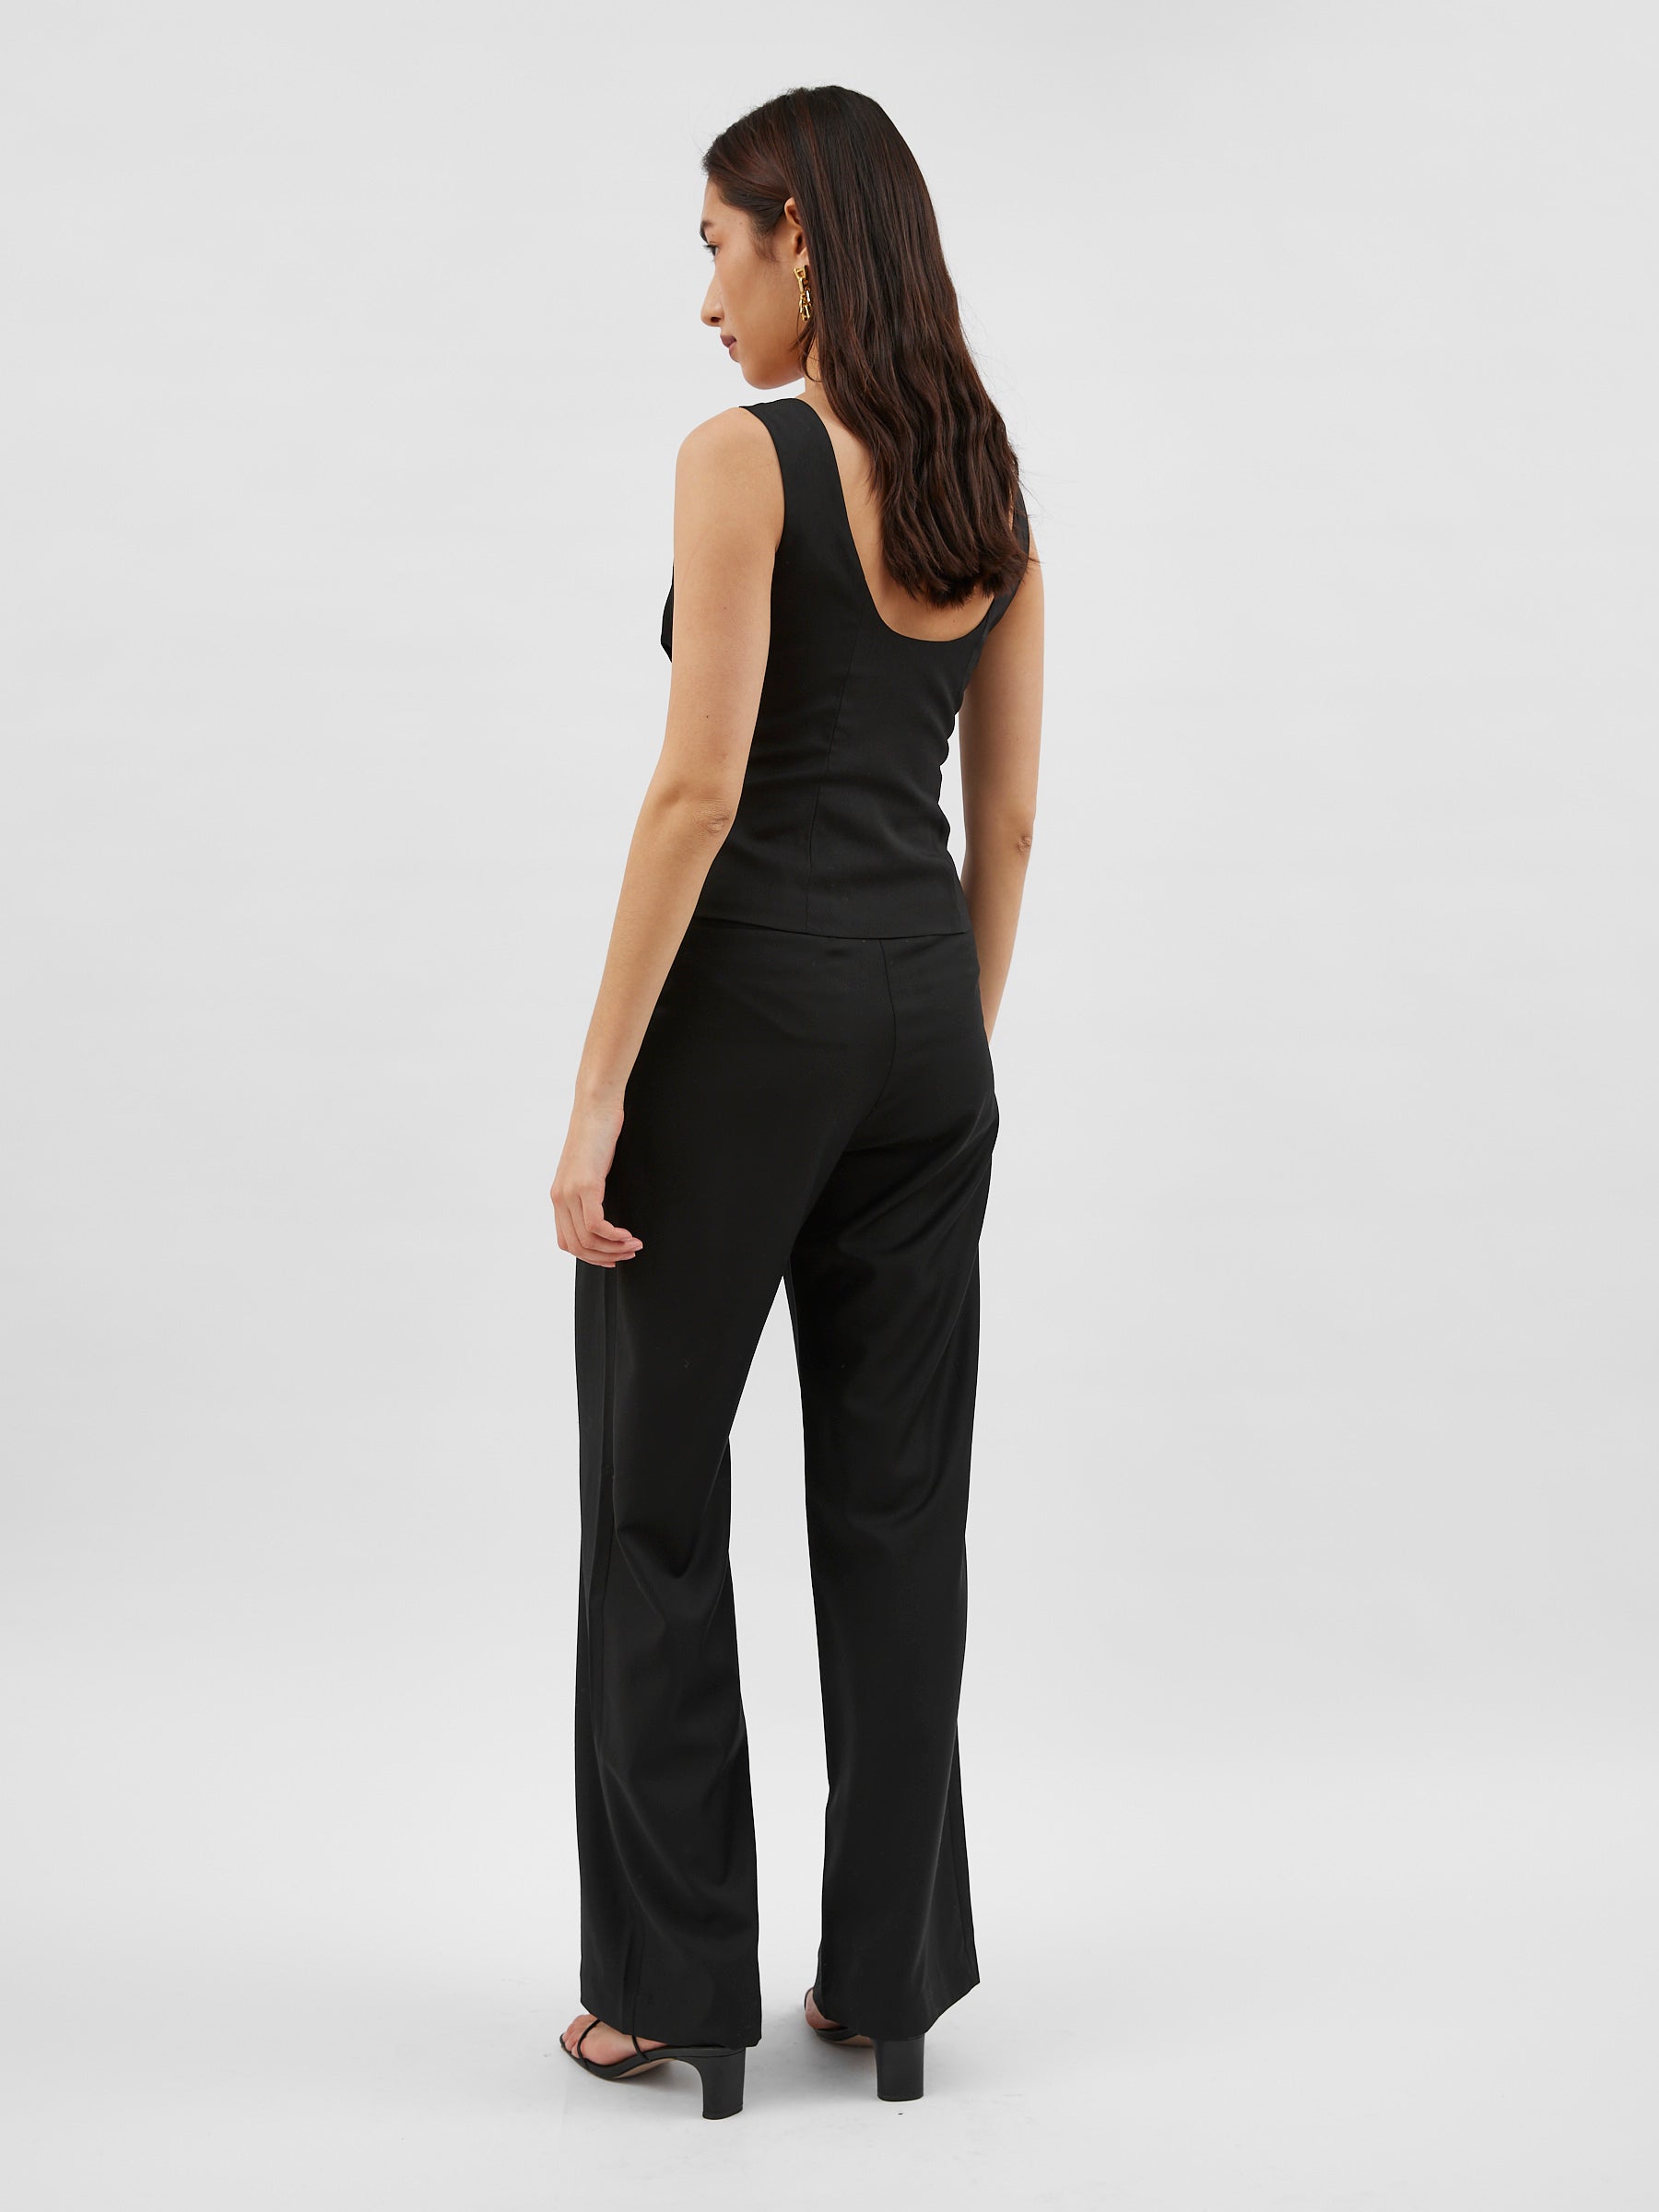 The Staple Black Ladies Track Suit – Hanlyn Collective